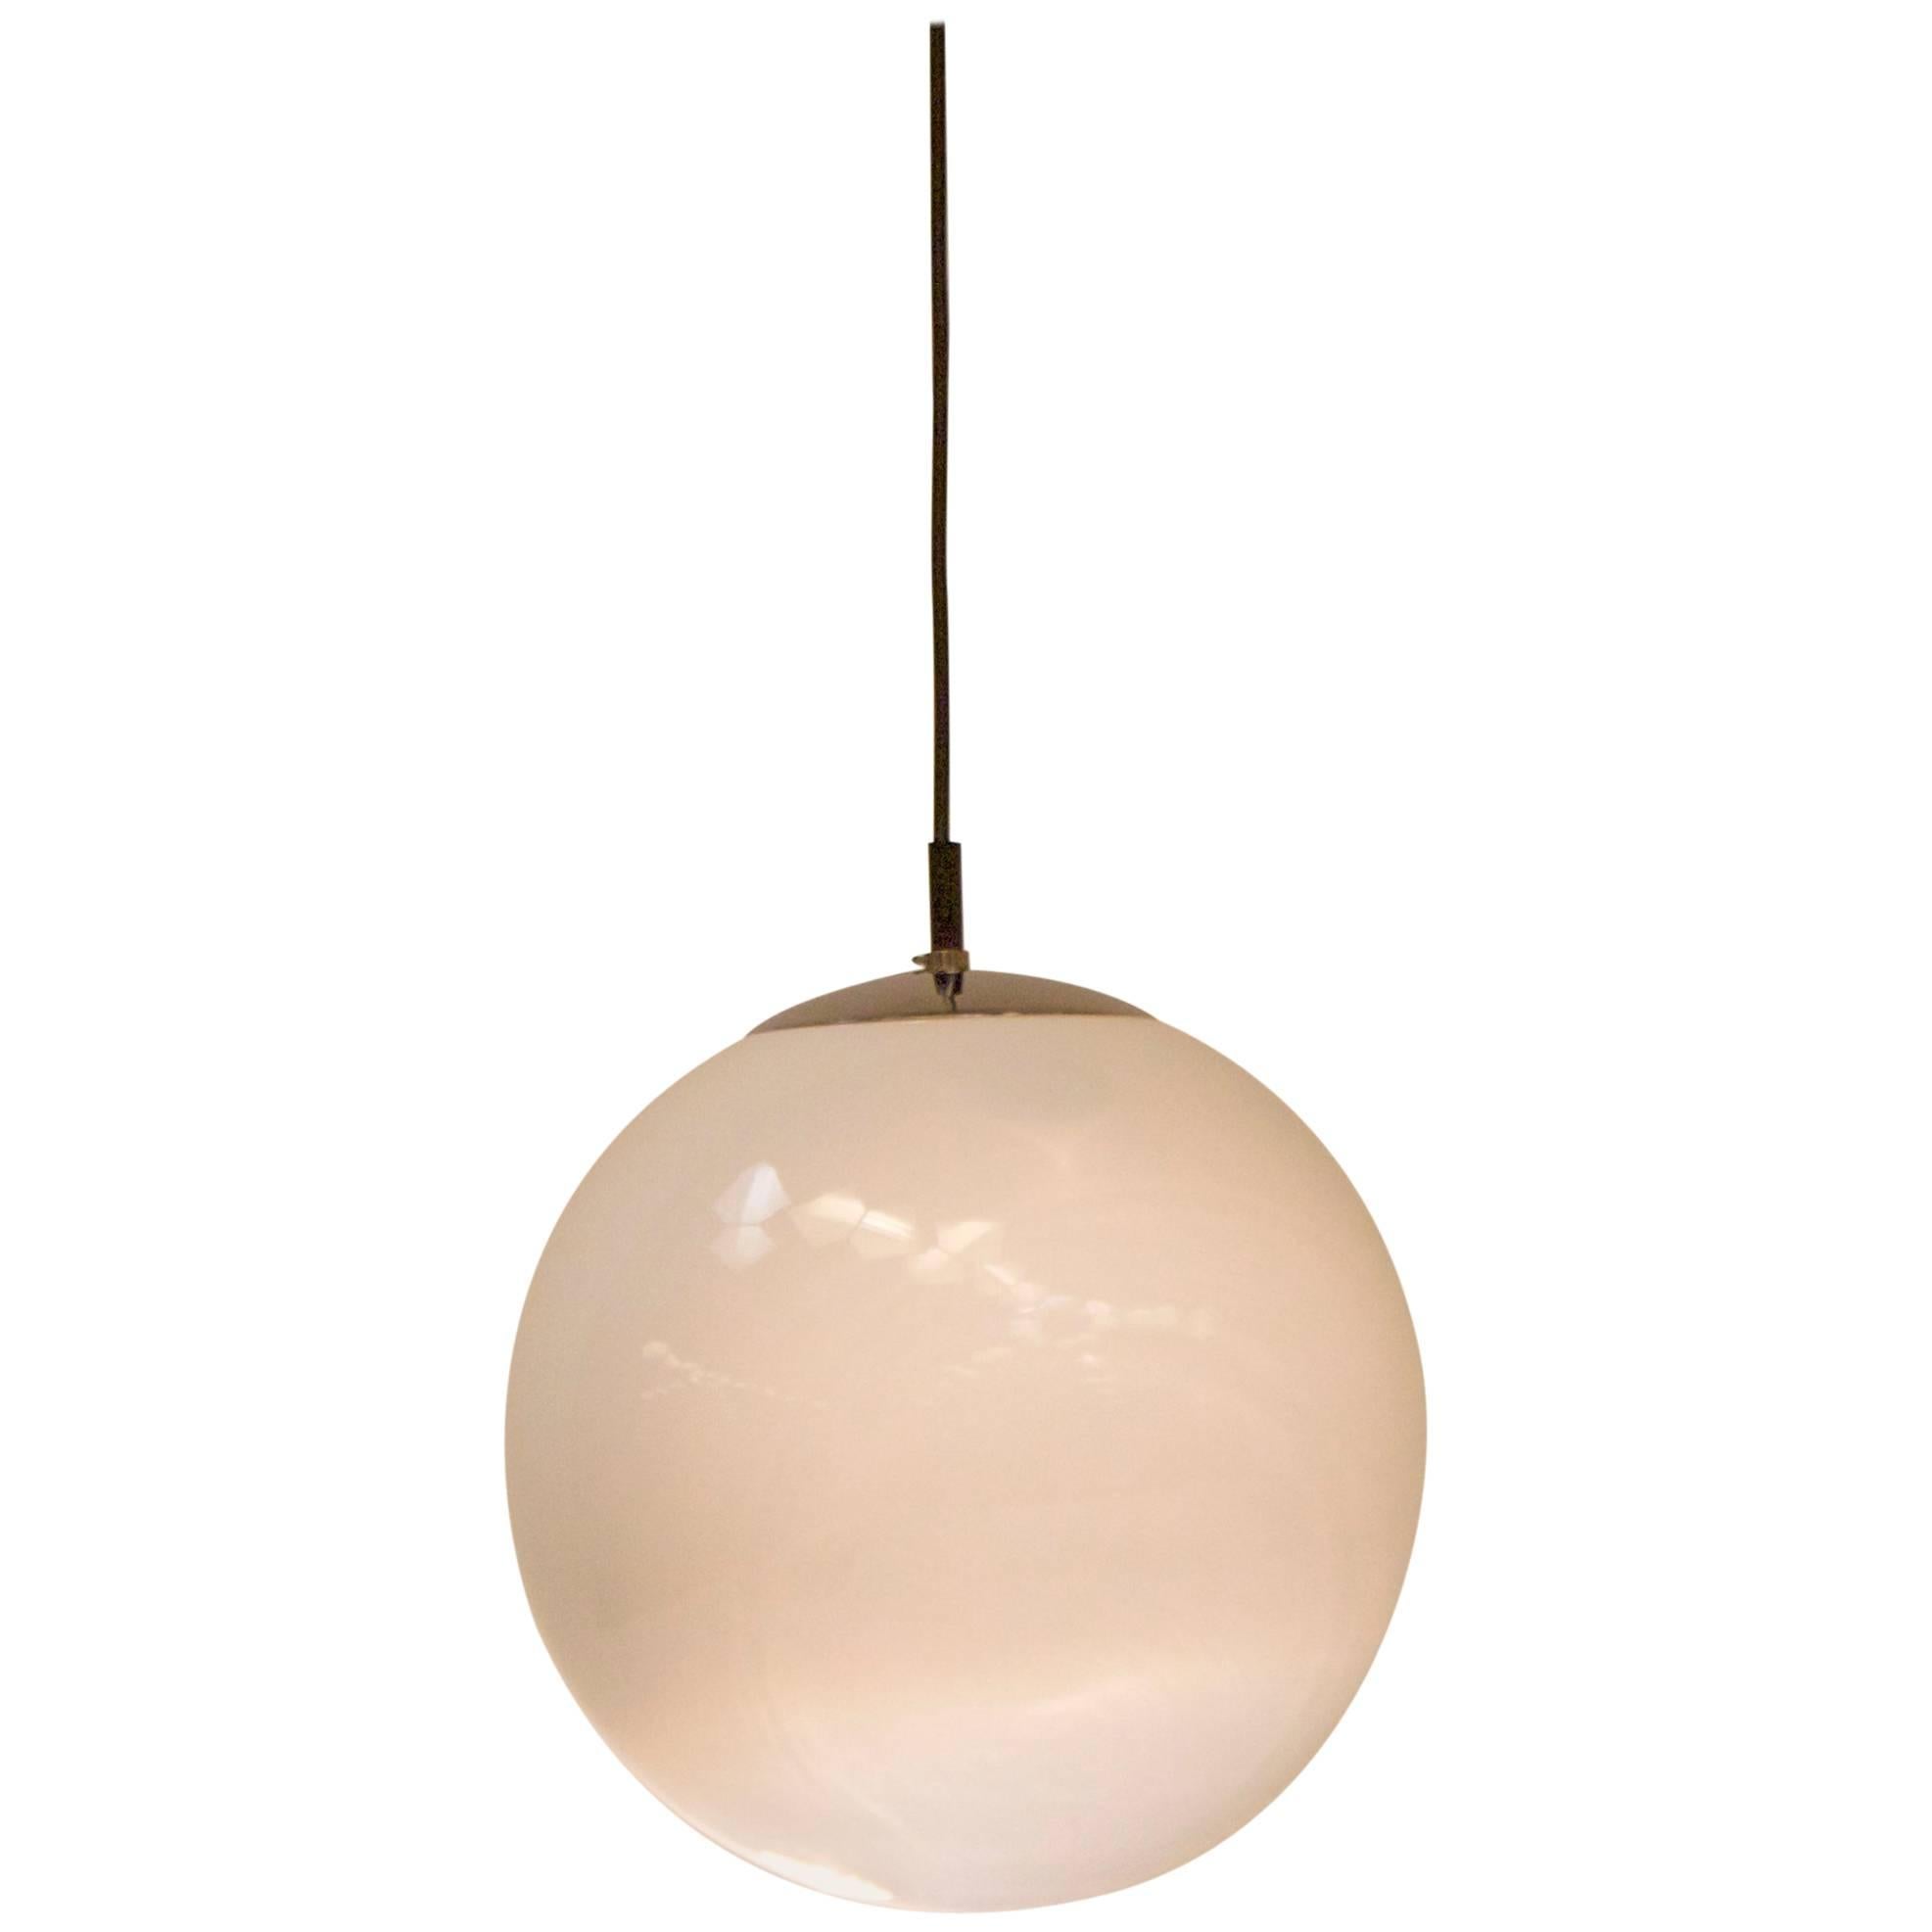 One of Four Large "Morning Dew" Globe Pendants by RAAK, Amsterdam